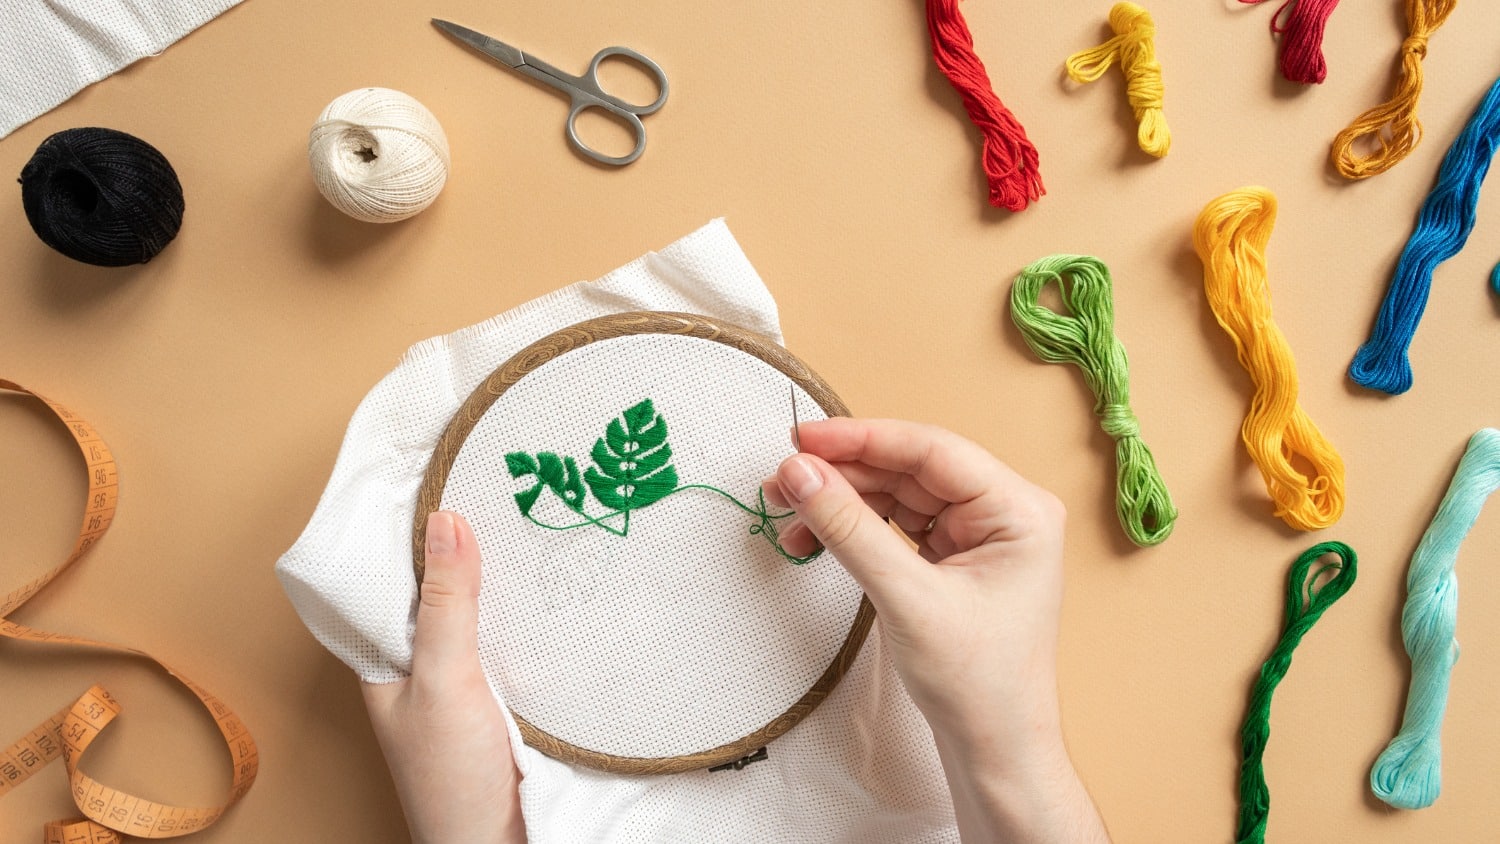 Stitching with Water-Soluble Paper  Paper embroidery, Embroidery patterns,  Learn embroidery